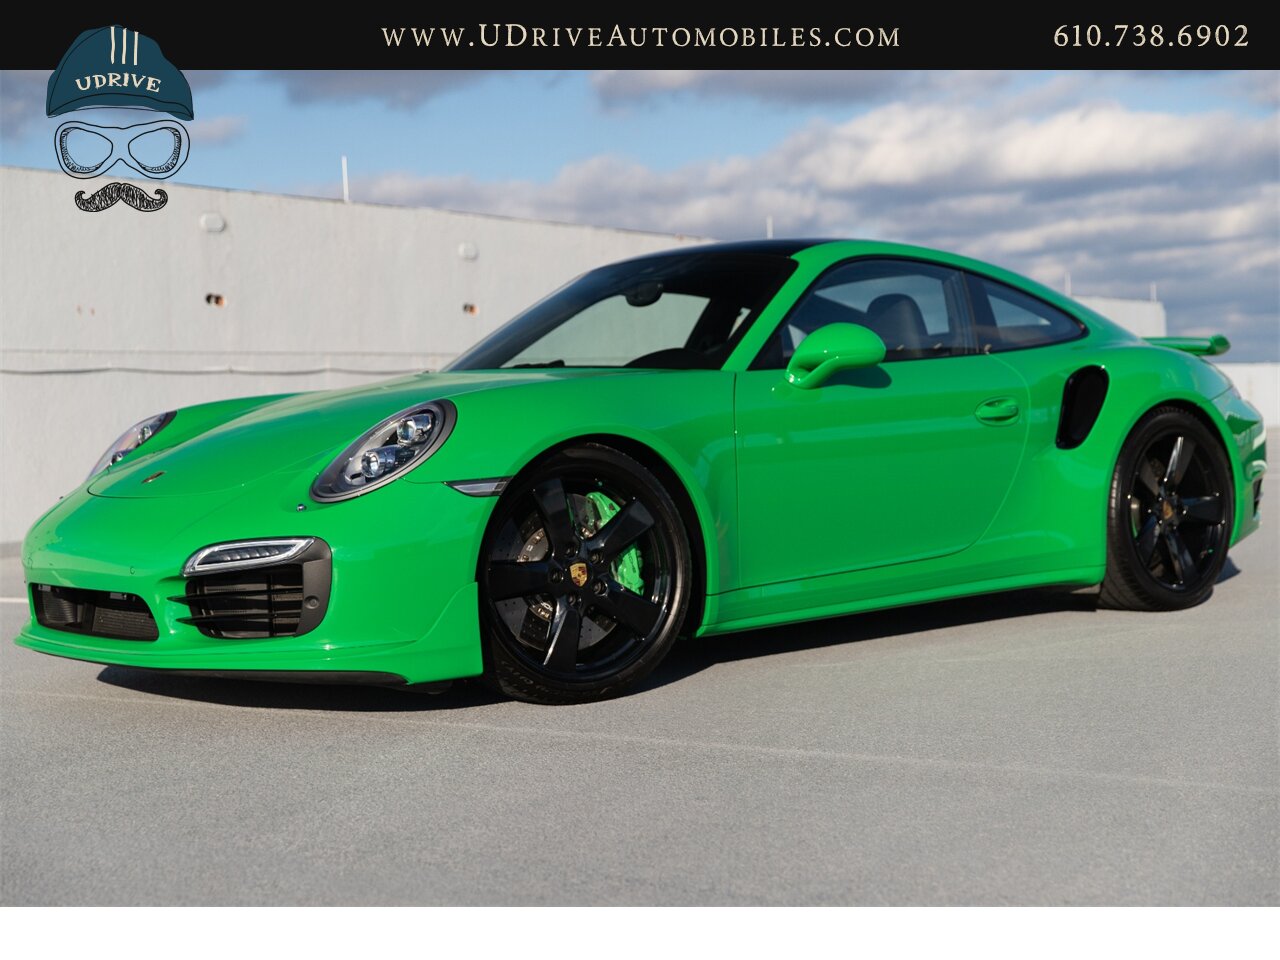 2016 Porsche 911 Turbo S PTS Viper Green Aerokit $203k MSRP  Painted Side Skirts Painted Grilles Wheels in Black - Photo 1 - West Chester, PA 19382